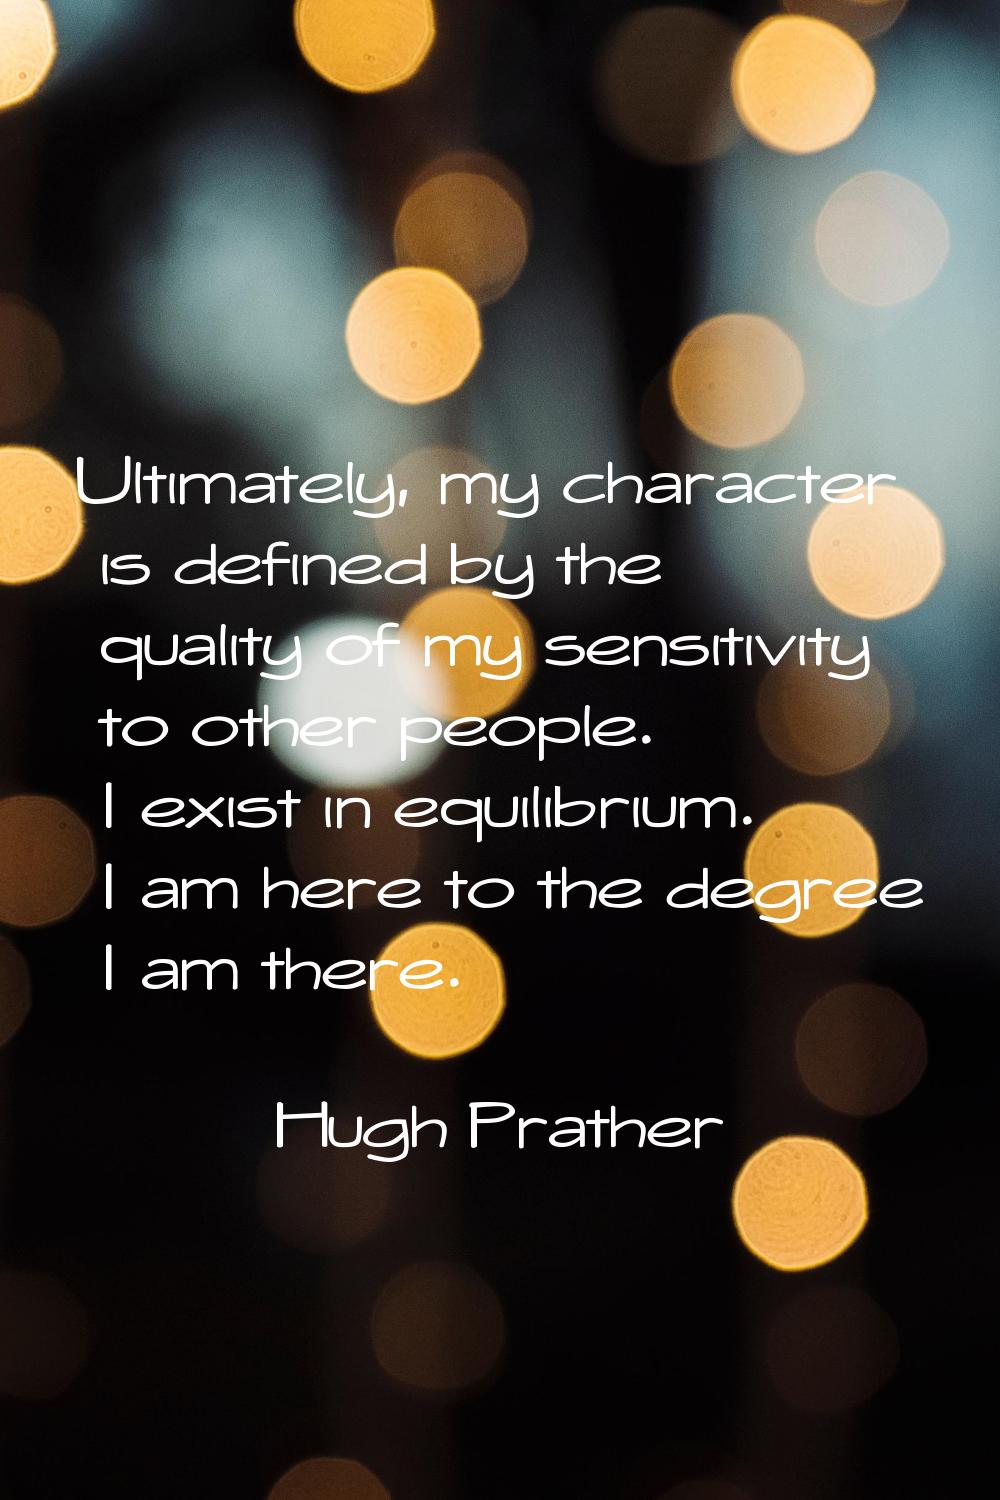 Ultimately, my character is defined by the quality of my sensitivity to other people. I exist in eq